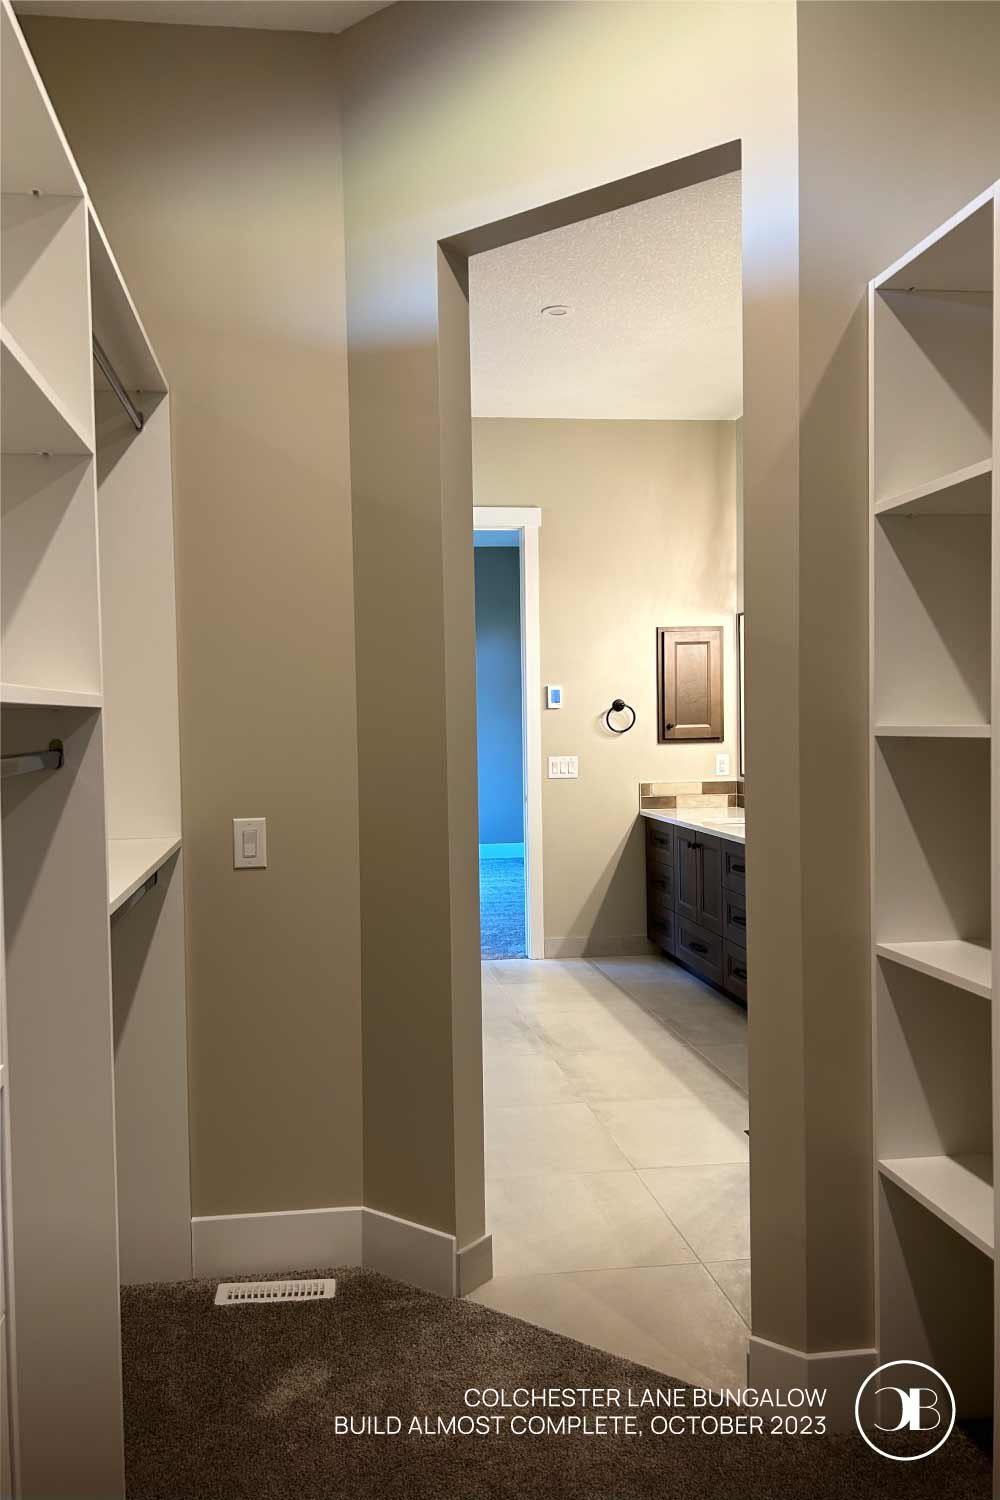 From bathroom, to walk-in closet (and then to laundry!). Build almost complete for Colchester Lane Bungalow, by Carson Built Homes.